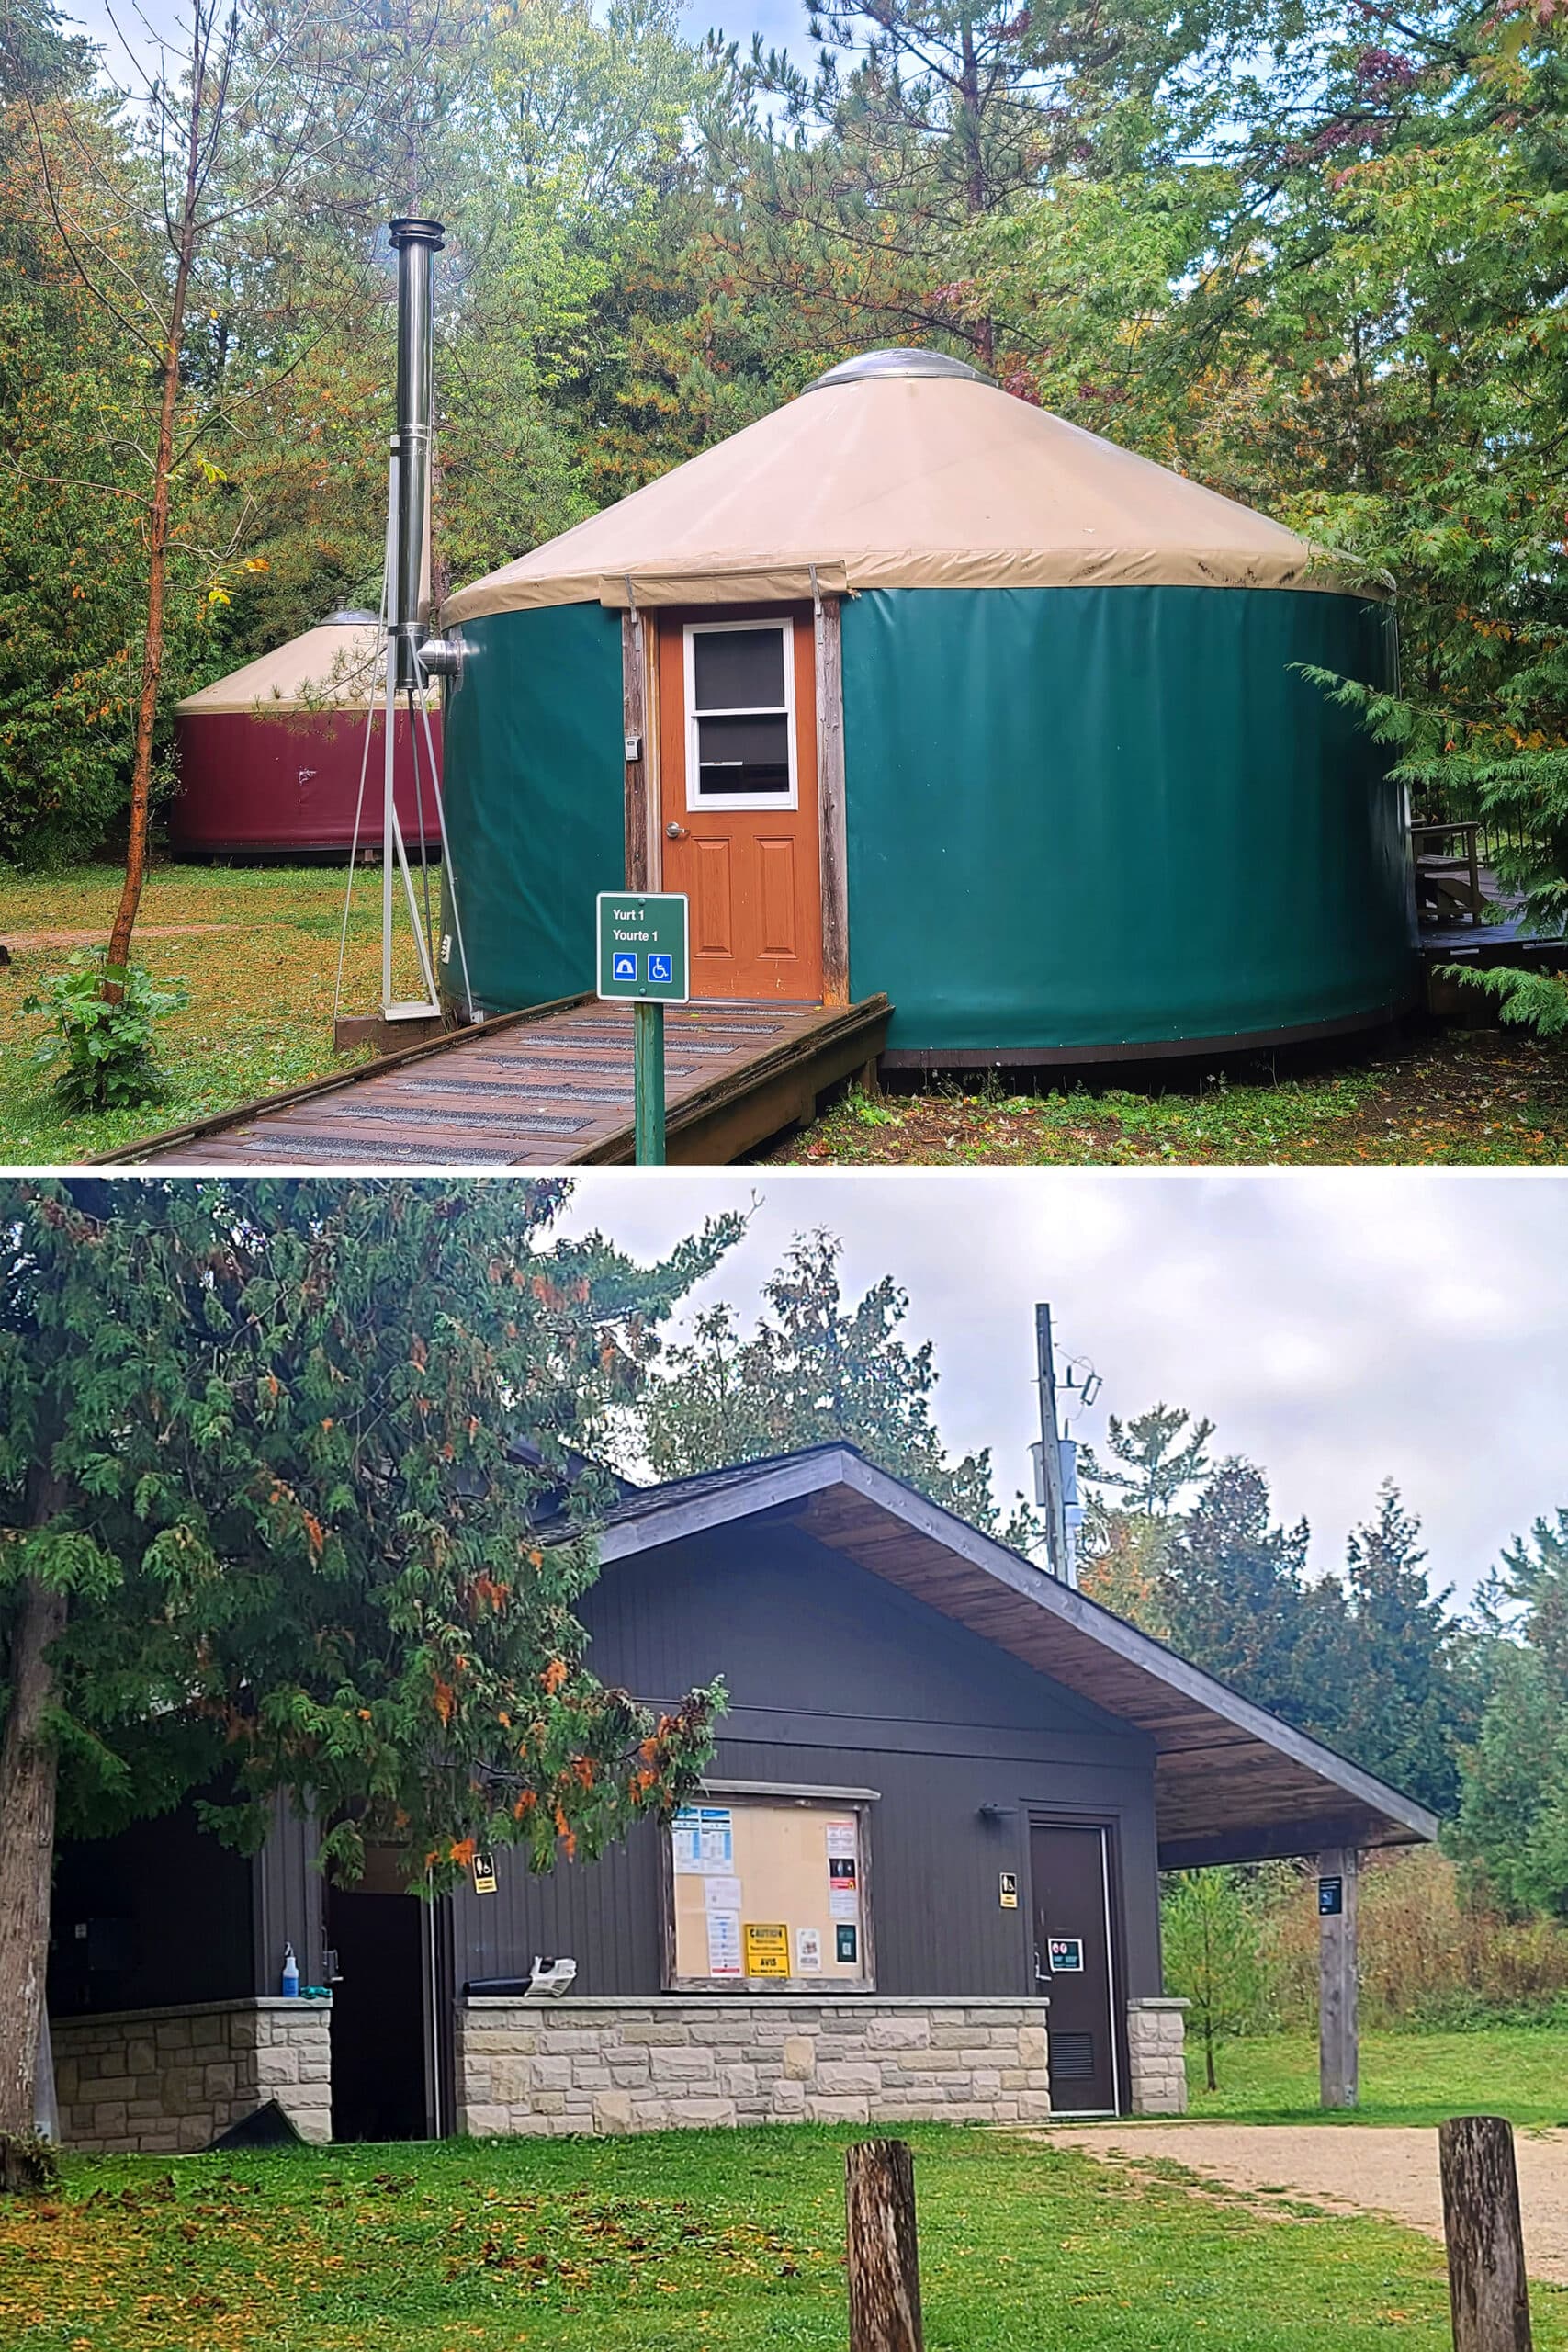 2 part image showing several colourful yurts, and a small comfort station.